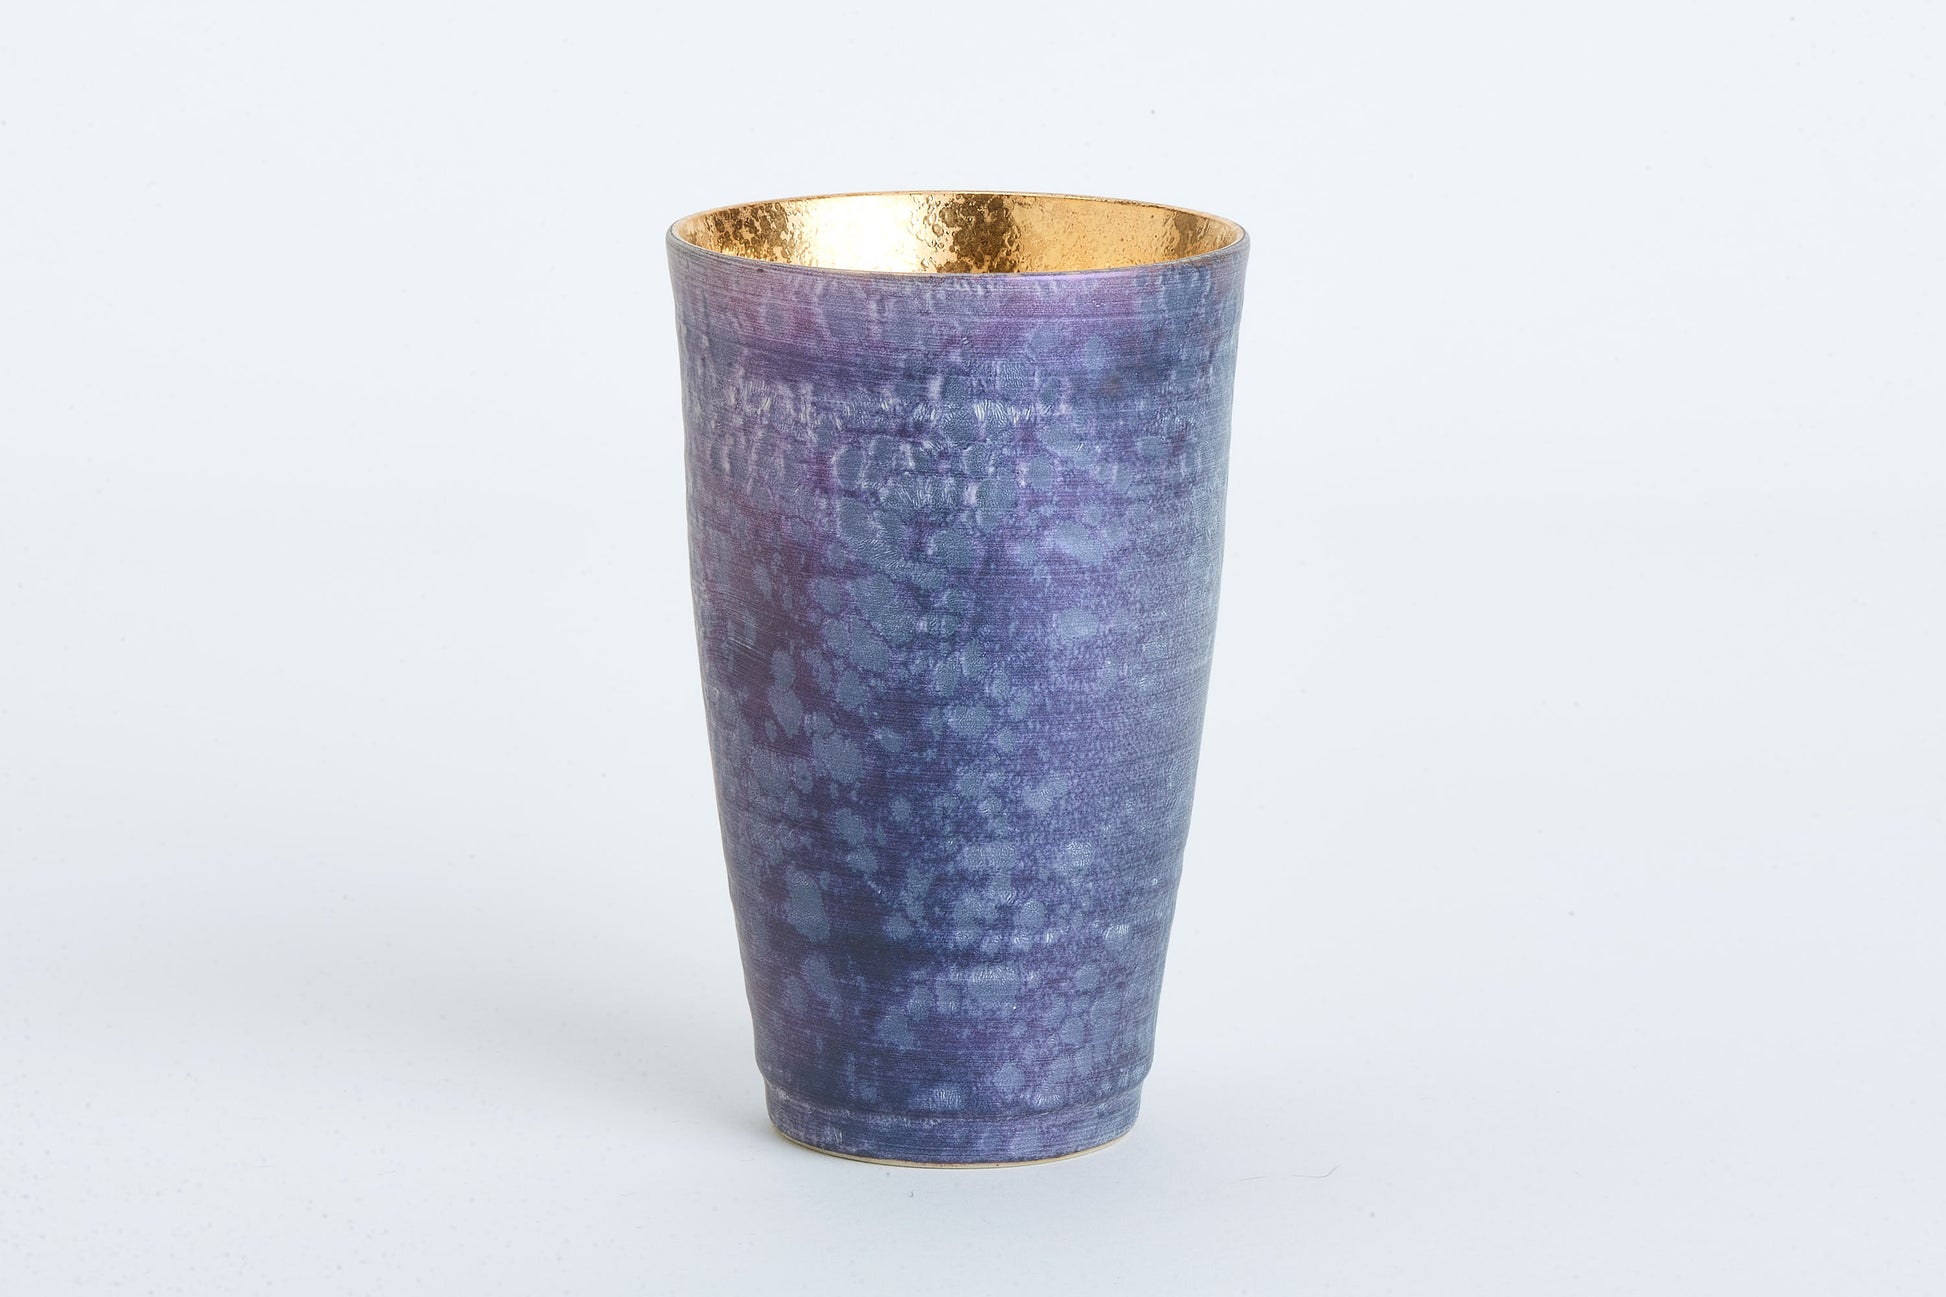 Iridescent Sake Cups by Lucid and Real